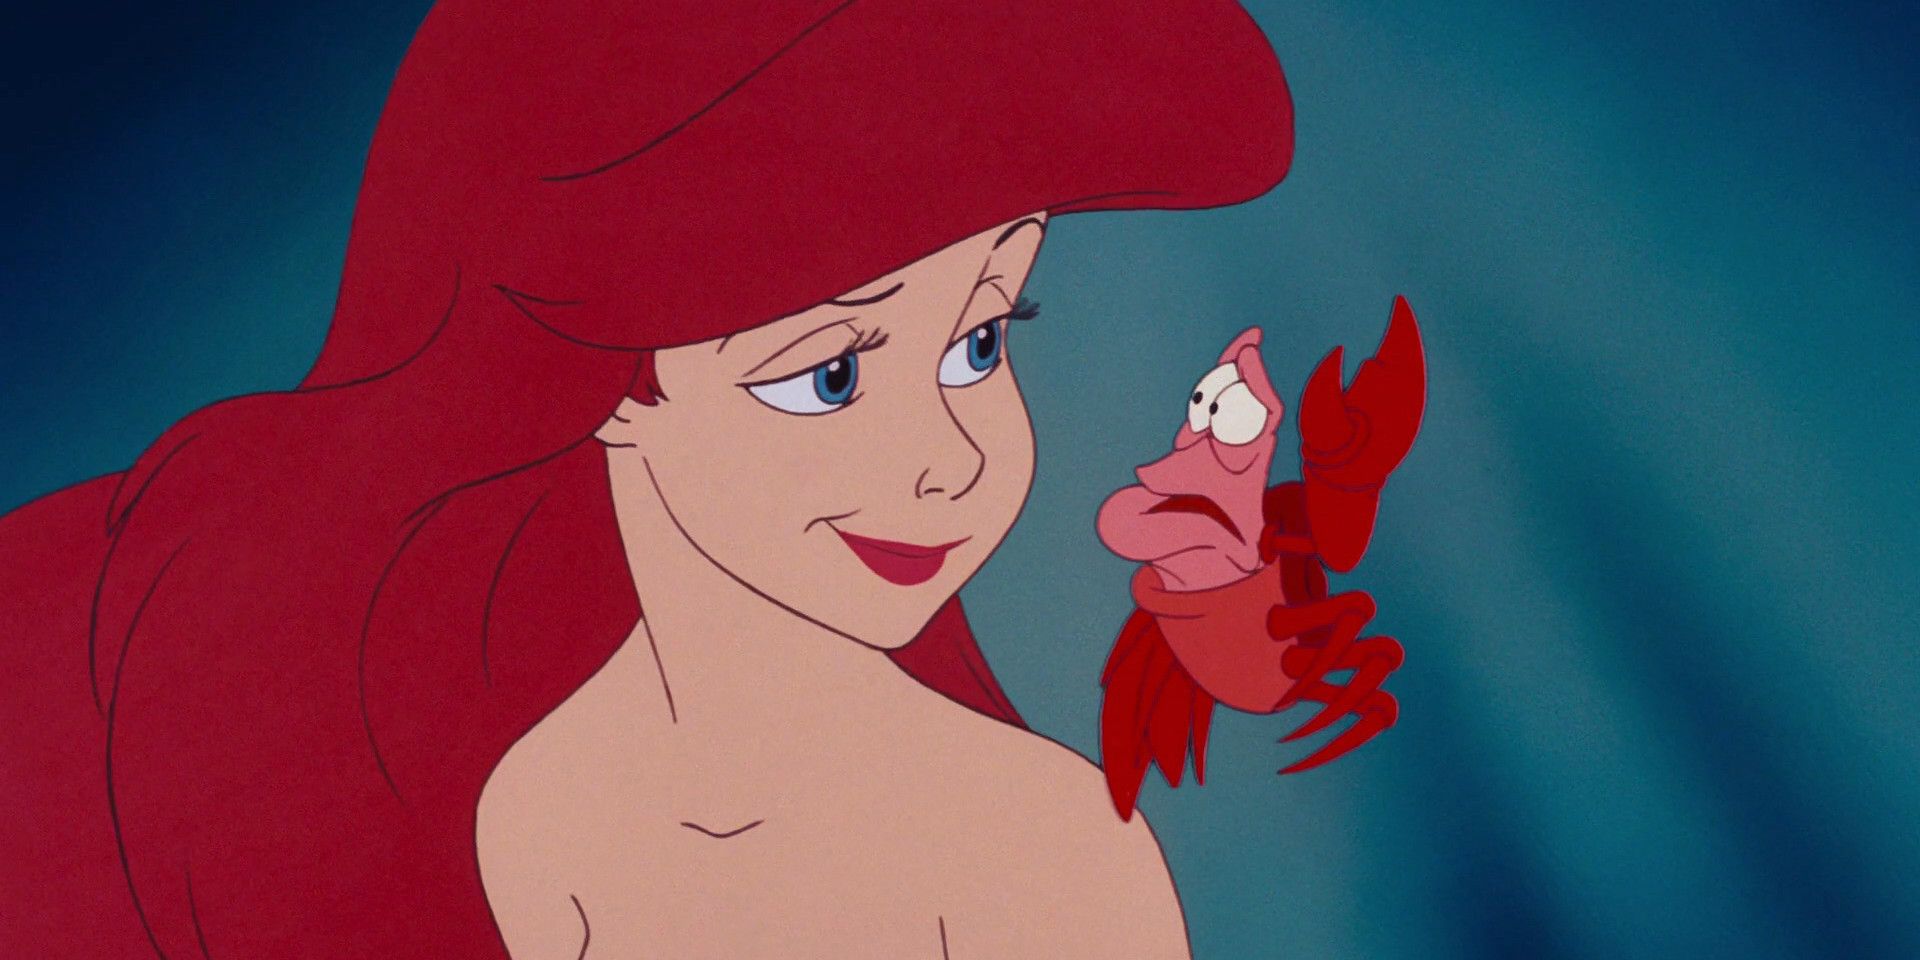 Sebastian and Ariel in the animated Little Mermaid